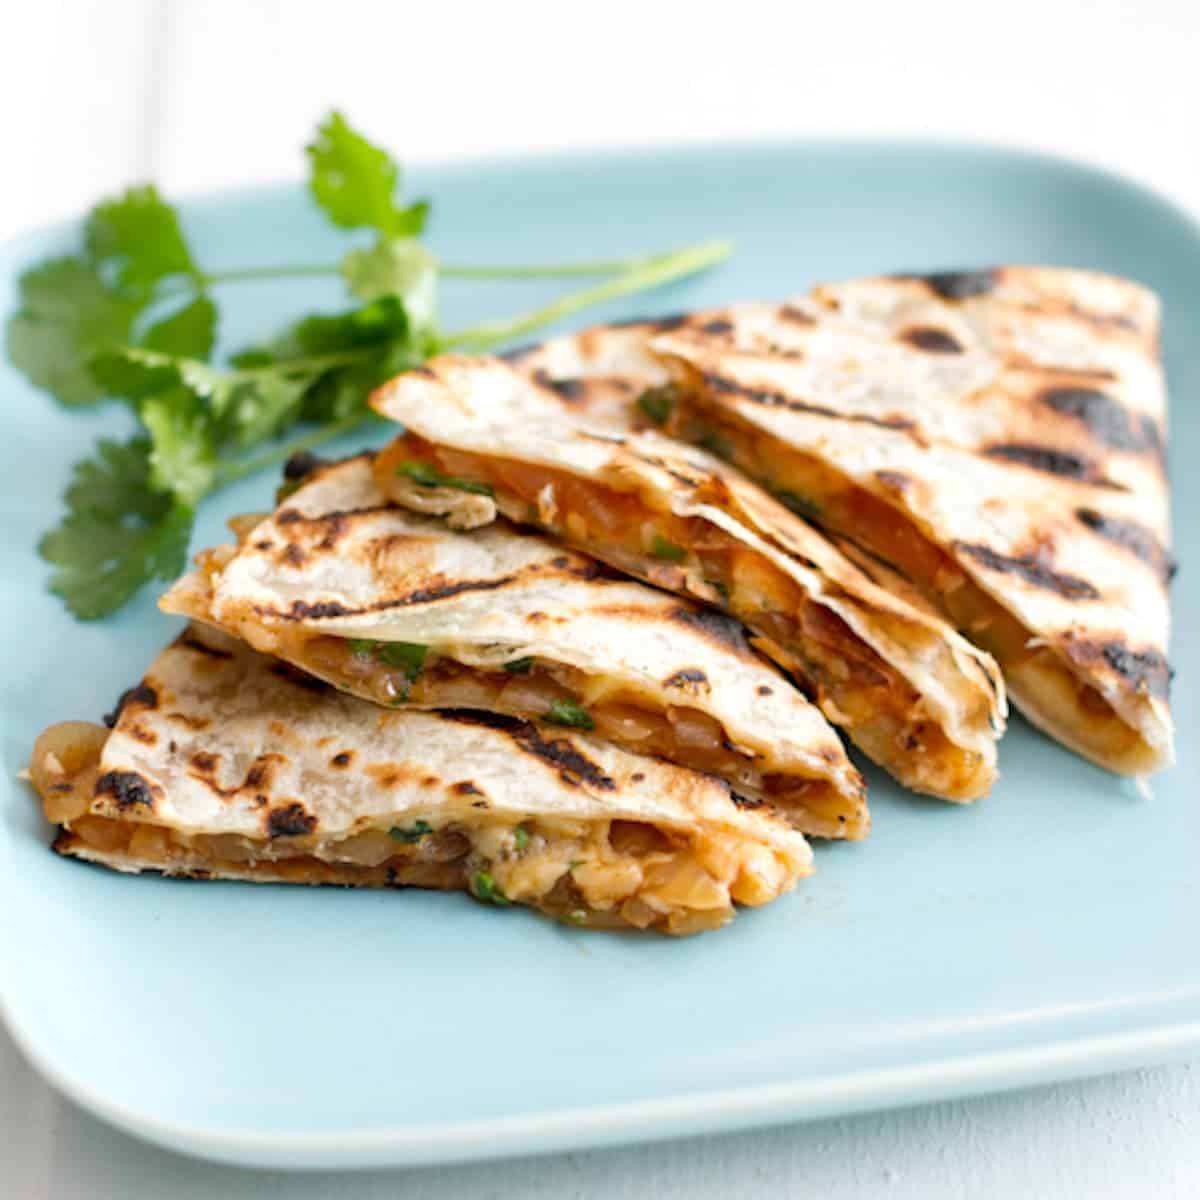 Barbeque and smoked gouda quesadillas on a blue plate.